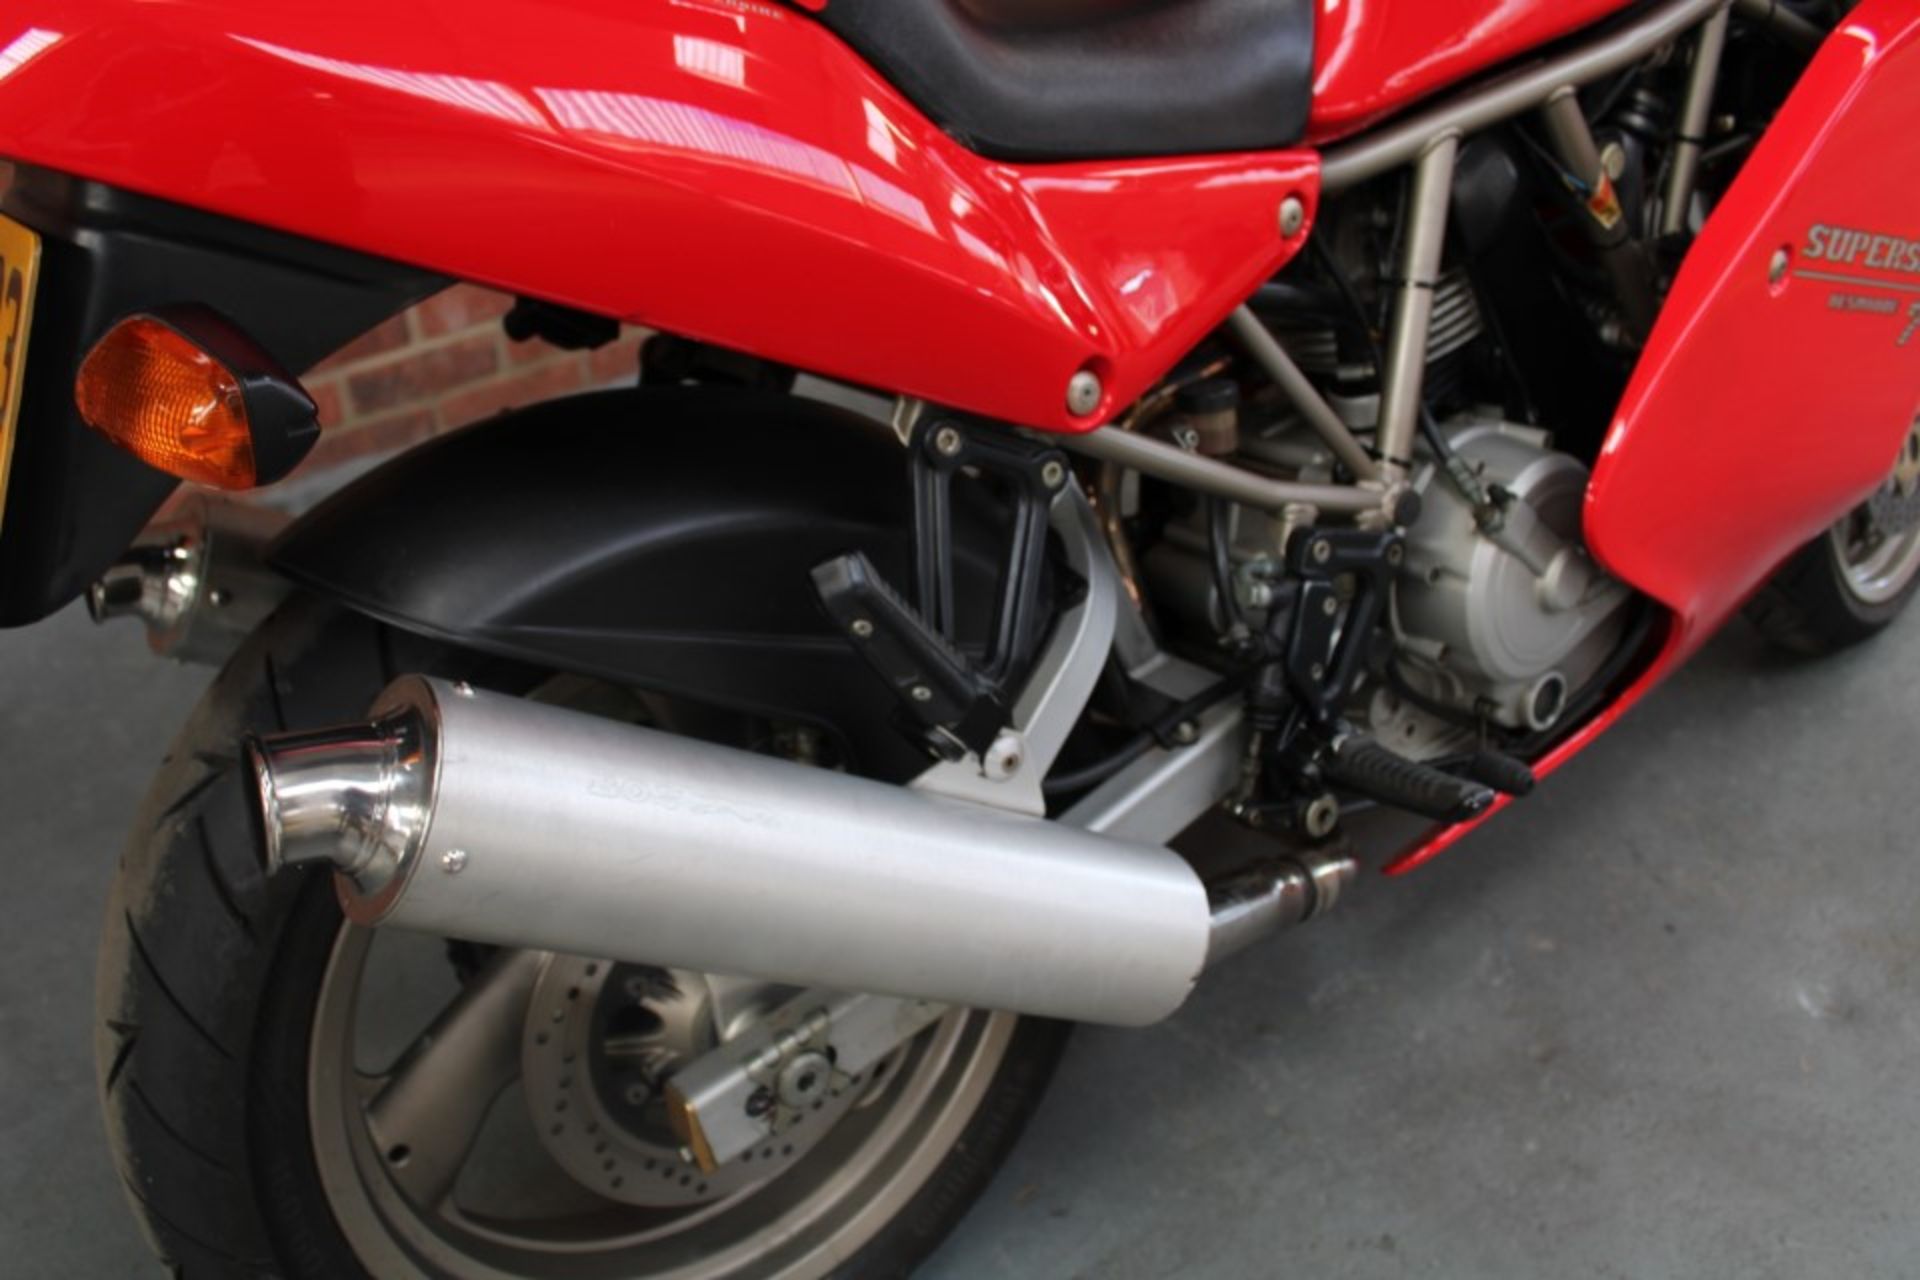 1994 Ducati 750 SS Supersport - Image 14 of 16